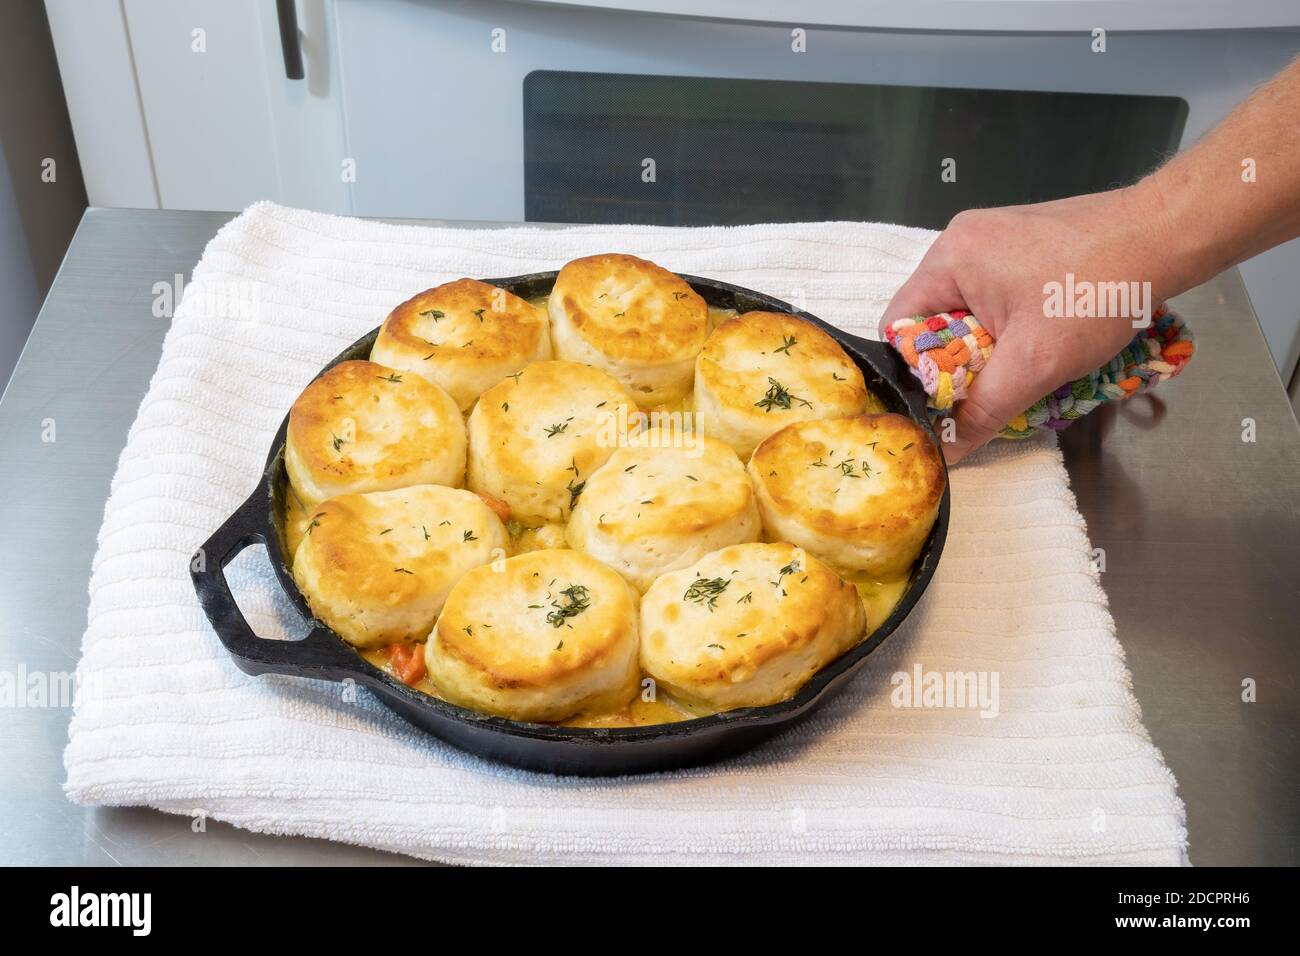 Chicken pot pie with biscuits used on top cooked to a toasty golden brown in a cast iron skillet with a man's hand holding it. Stock Photo